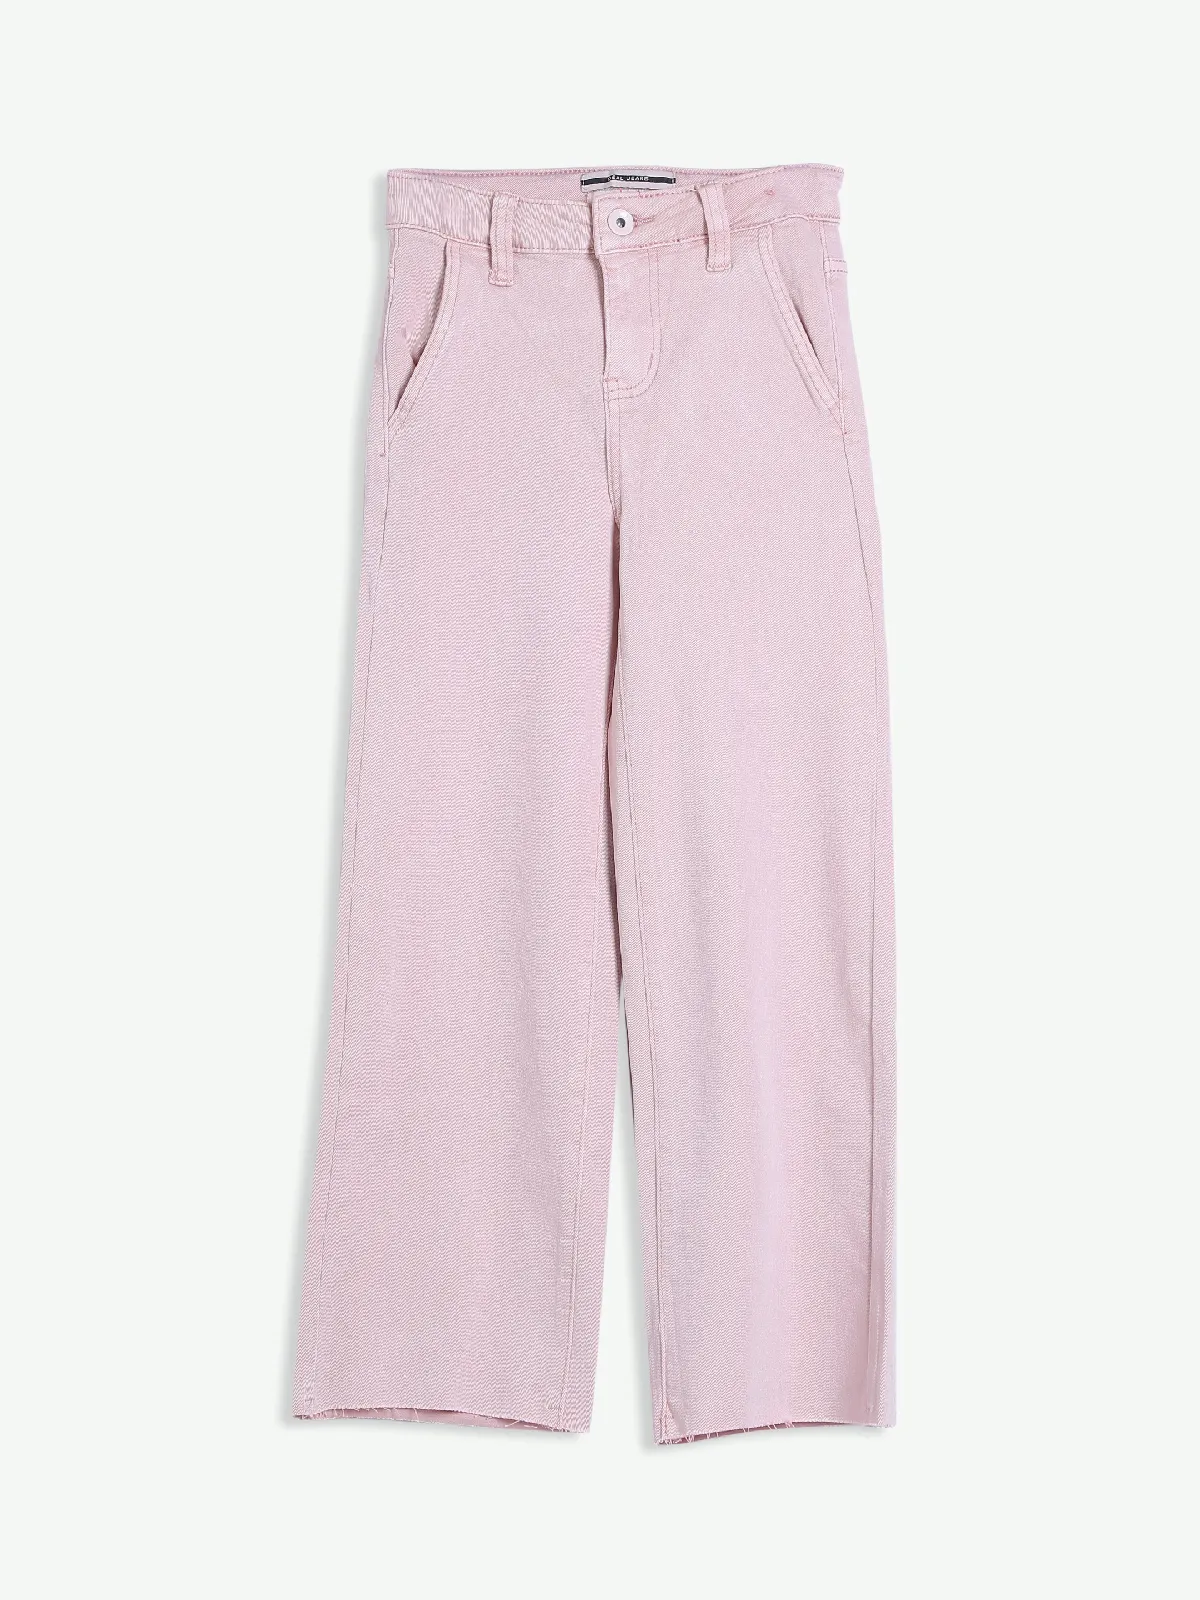 Deal baby pink solid straight jeans